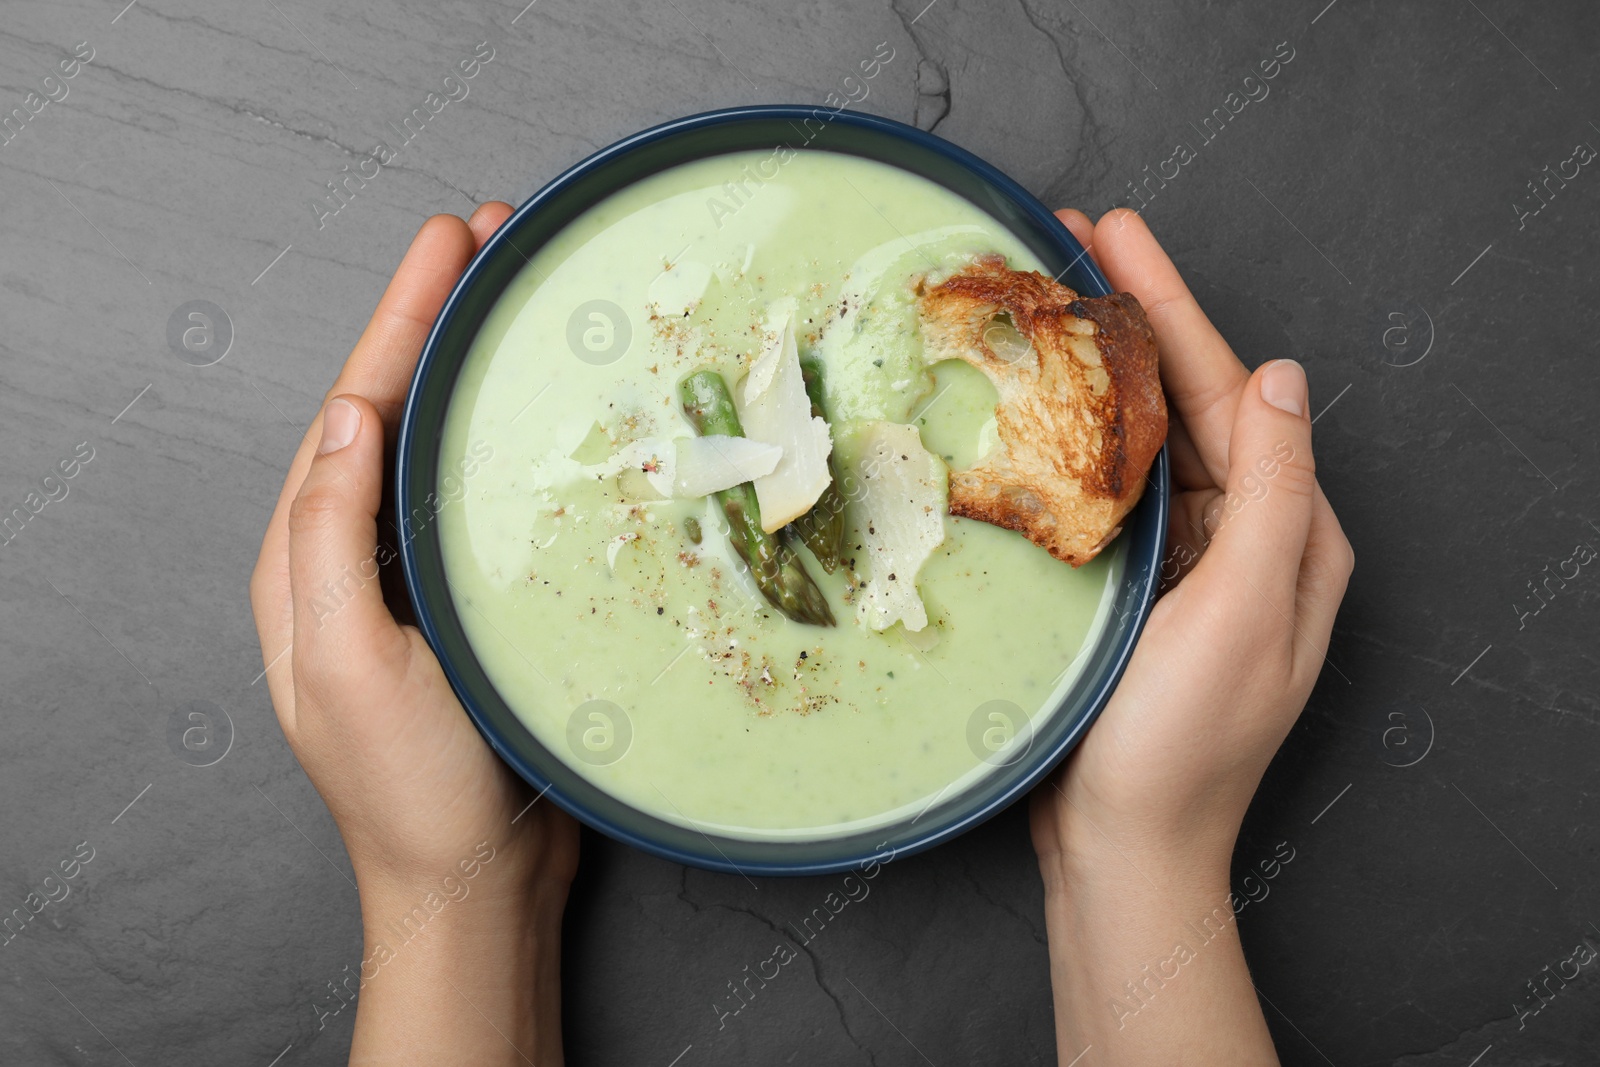 Photo of Woman with bowl of delicious asparagus soup at dark table, top view